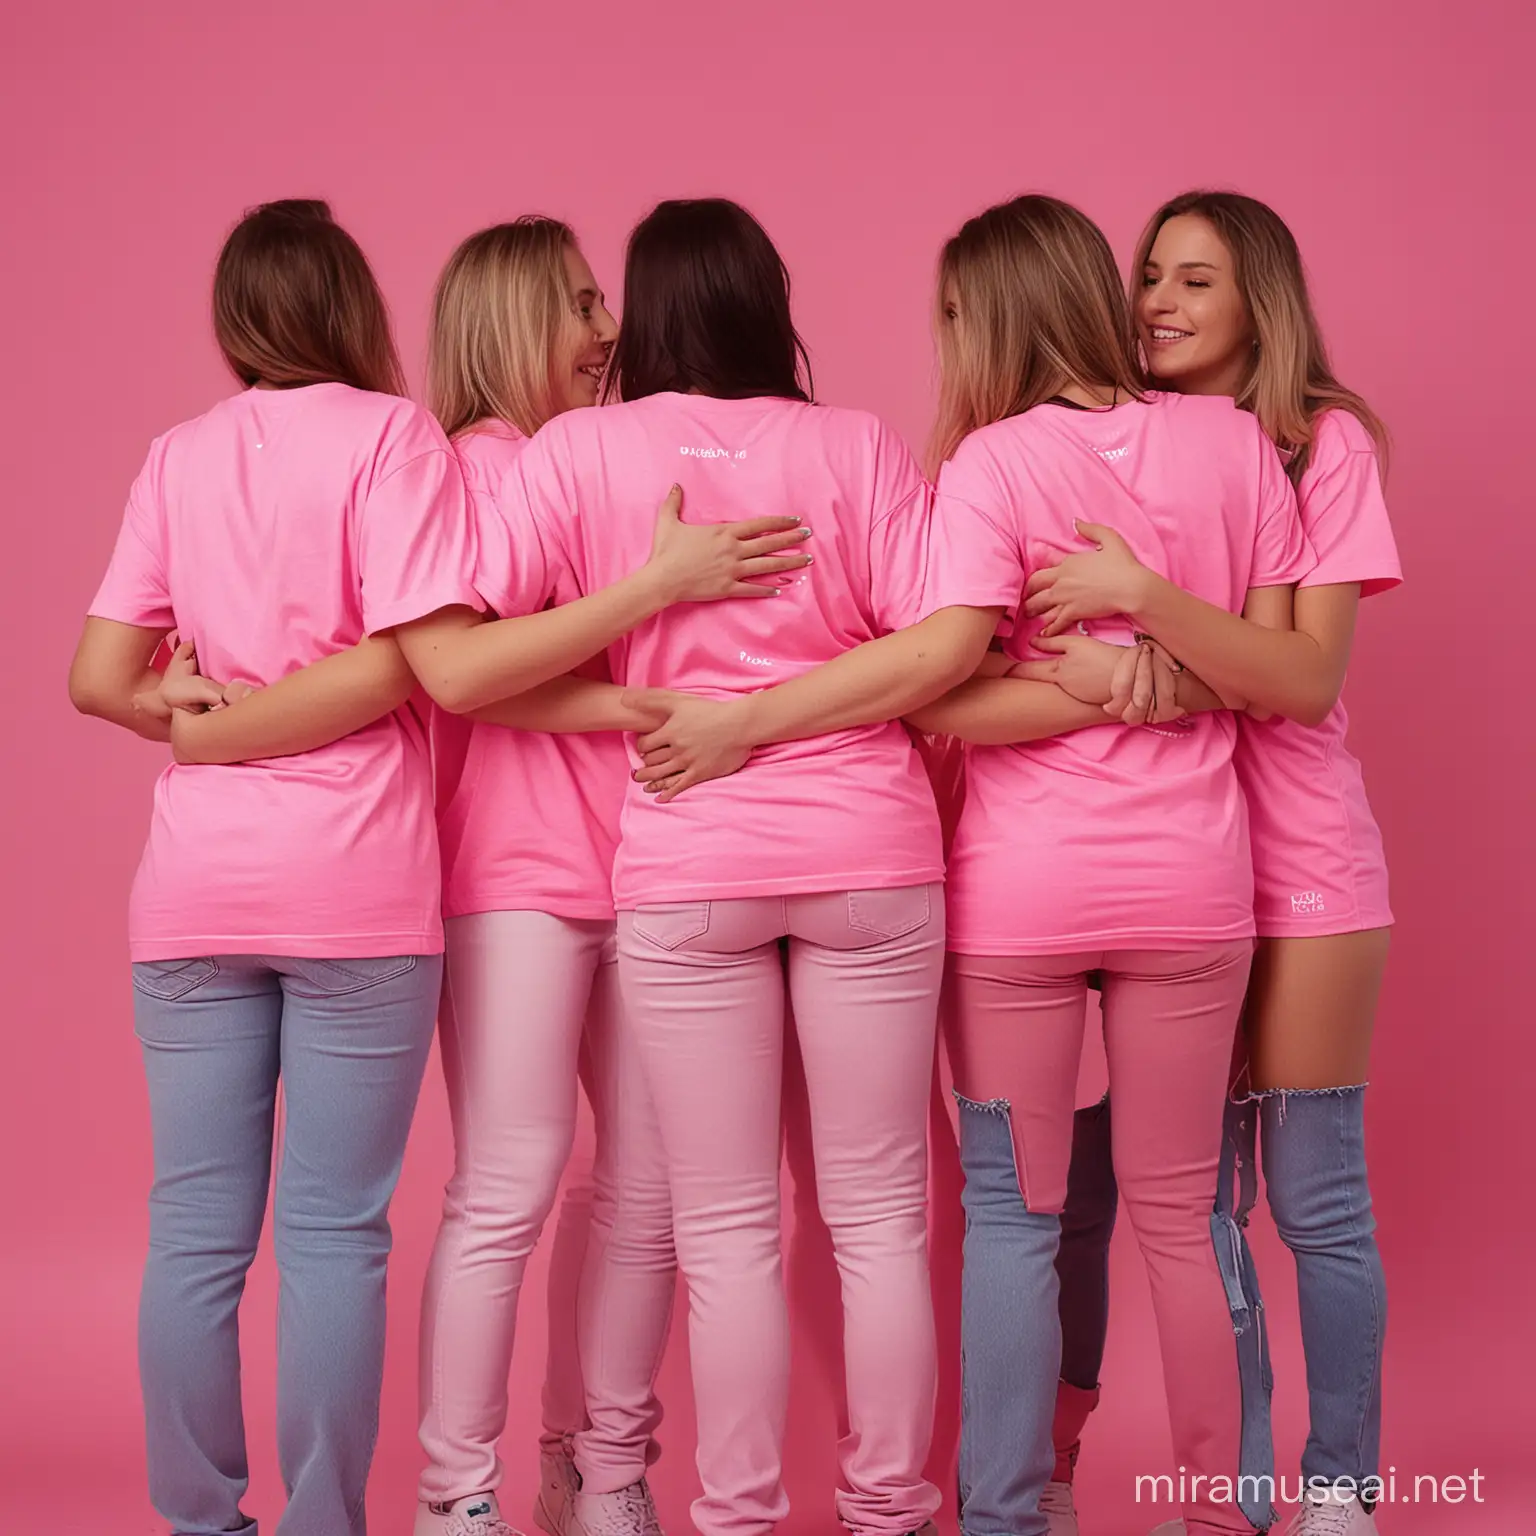 All group lesbians 17 years old and all in a straight line give hug happy two bye two and t-shirt pink fluo back view 